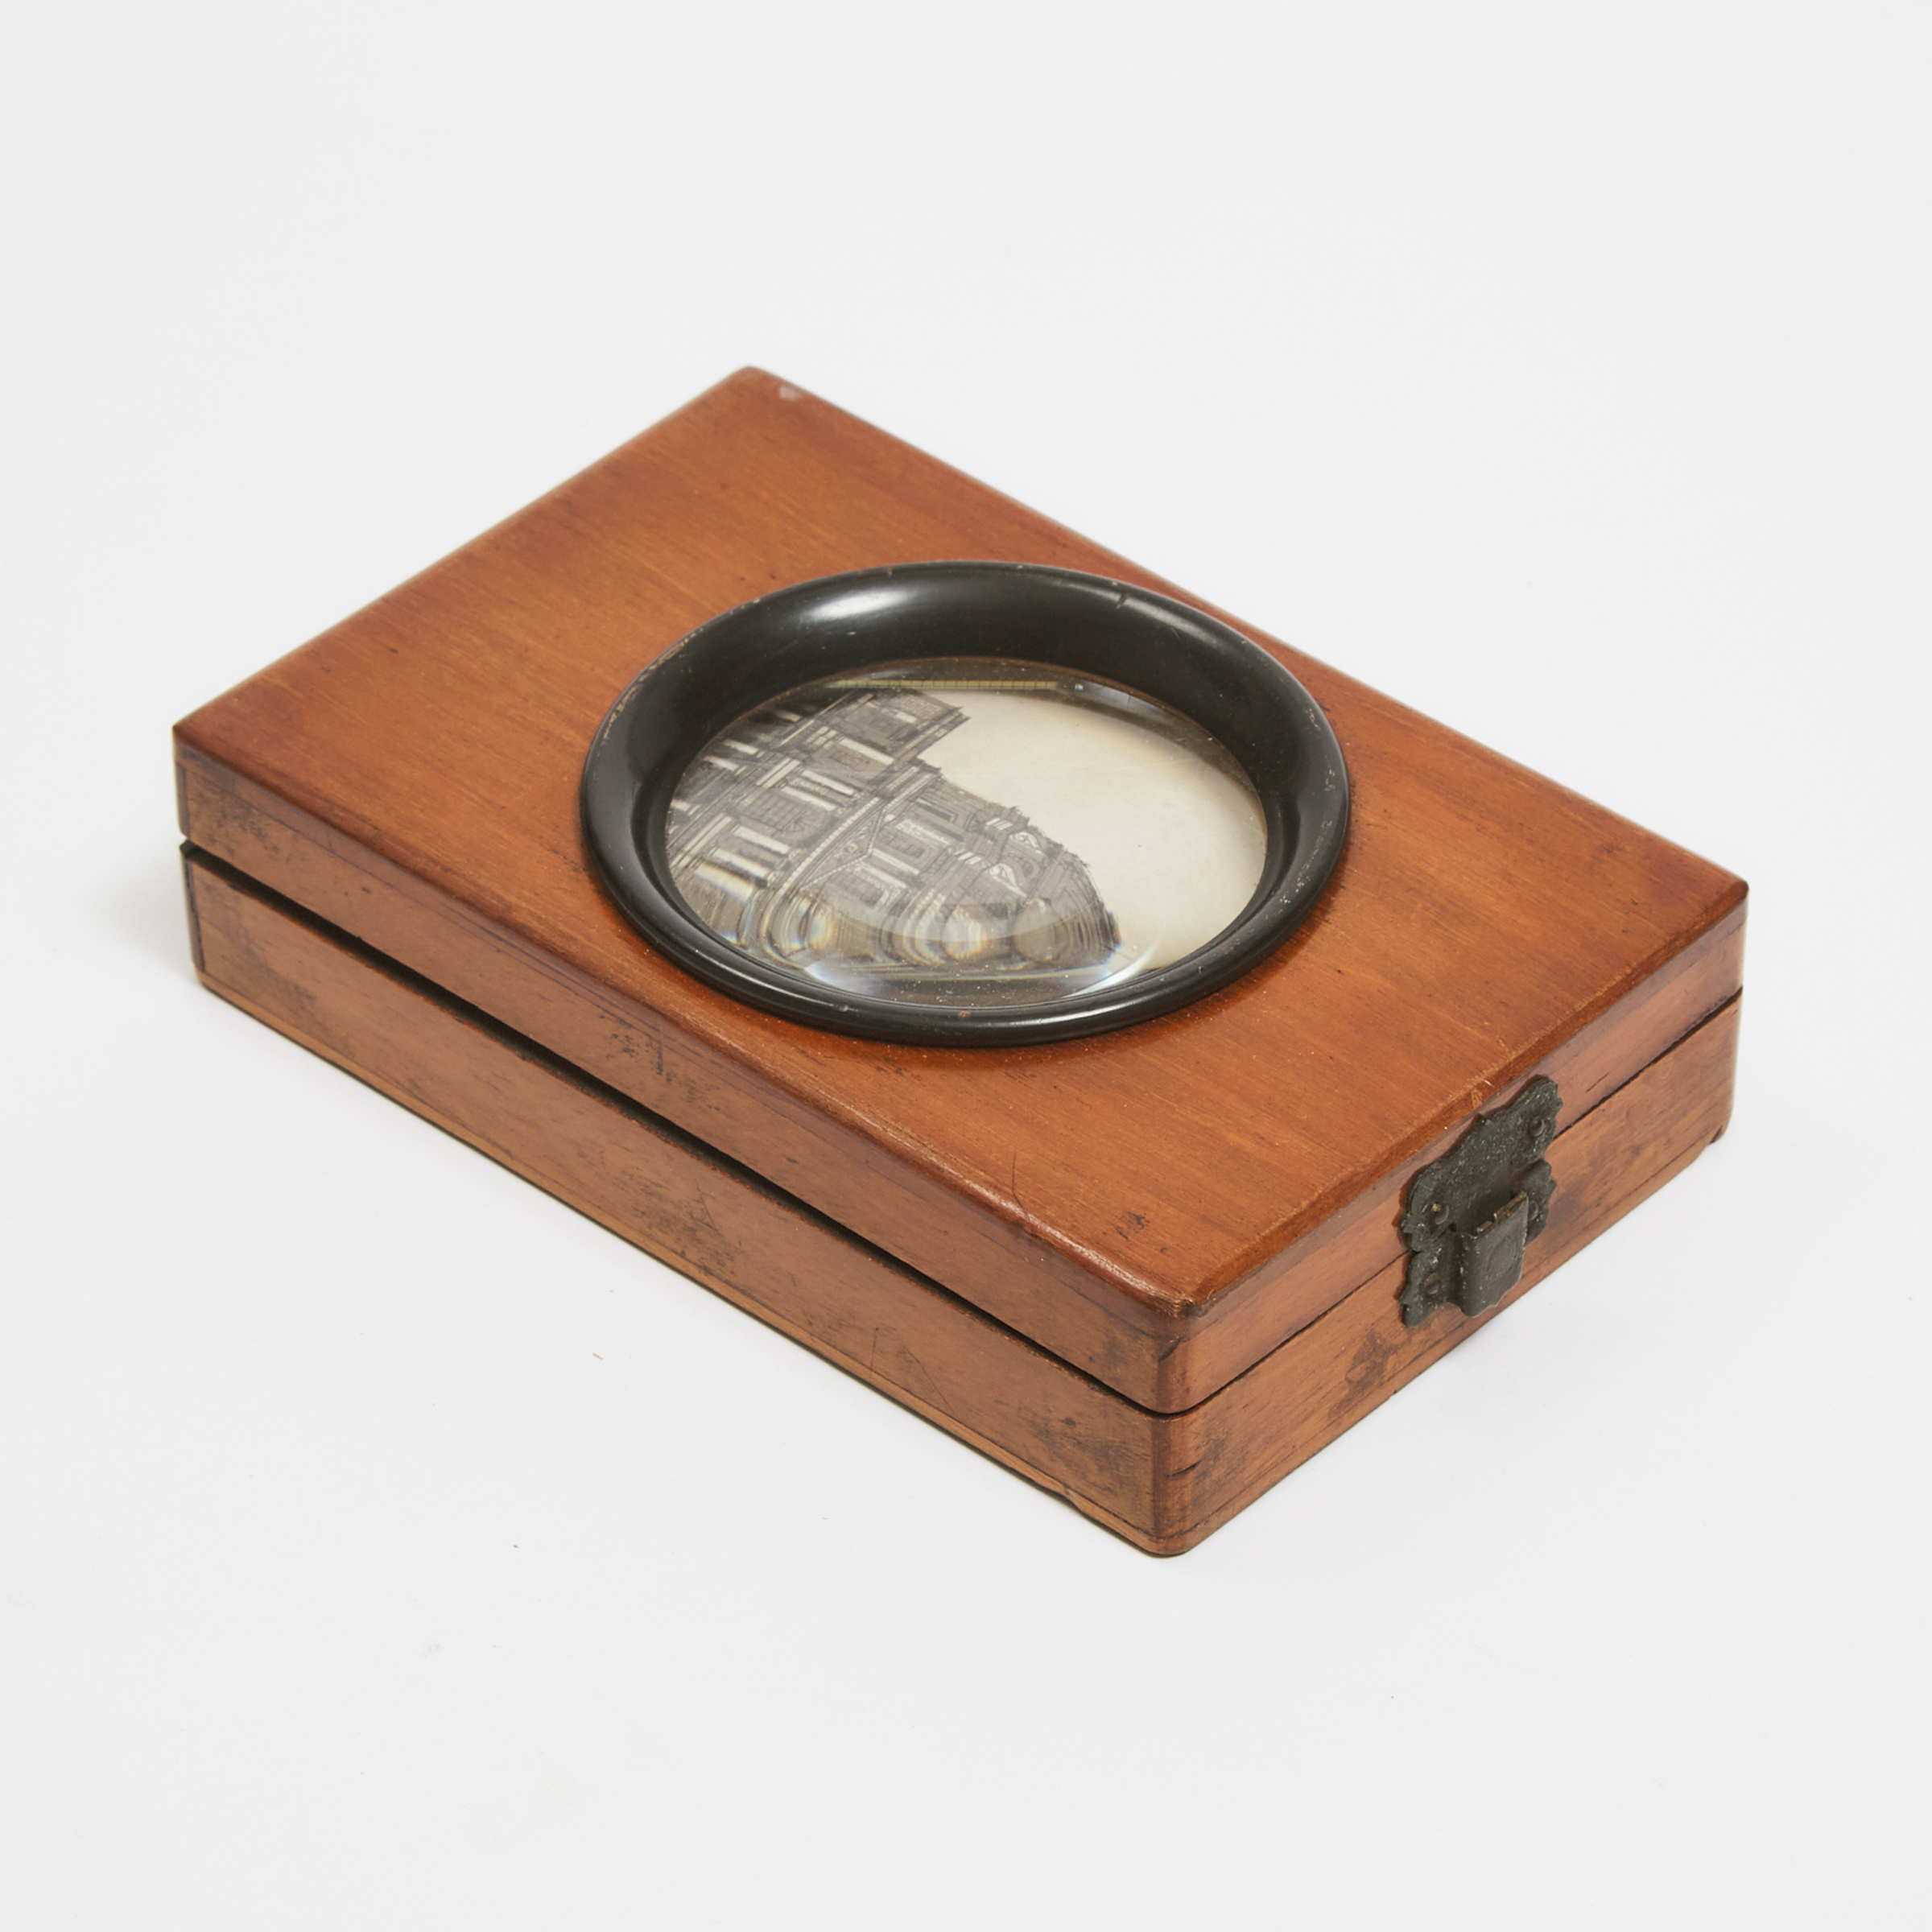 French Optical Card Viewer by Ancienne Maison Martinet, Paris, 19th century